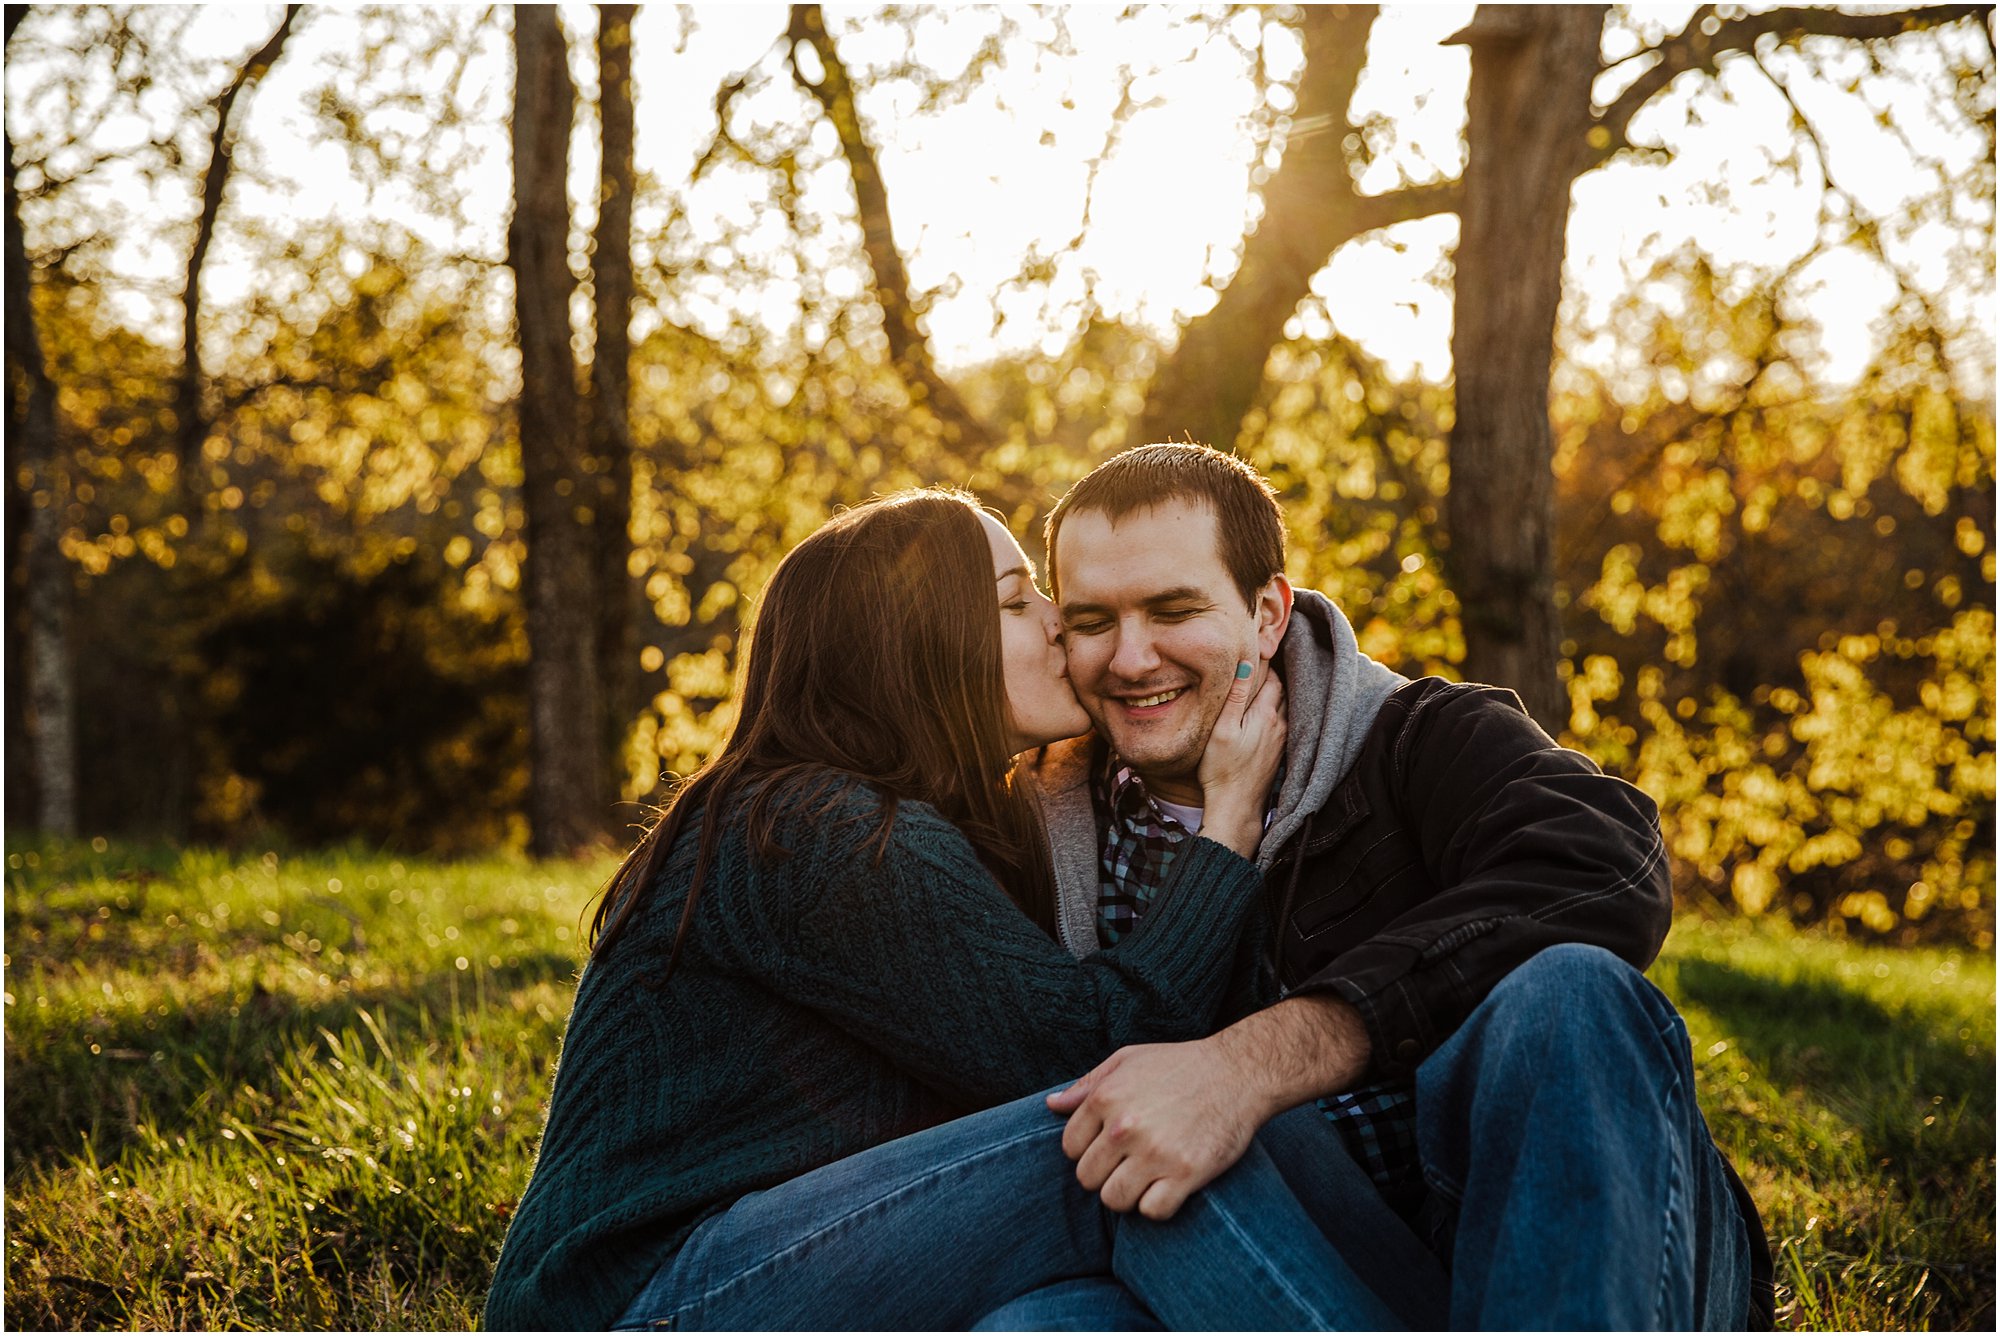 Girl kissing her fiancé on the cheek as he laughs and holds onto her.